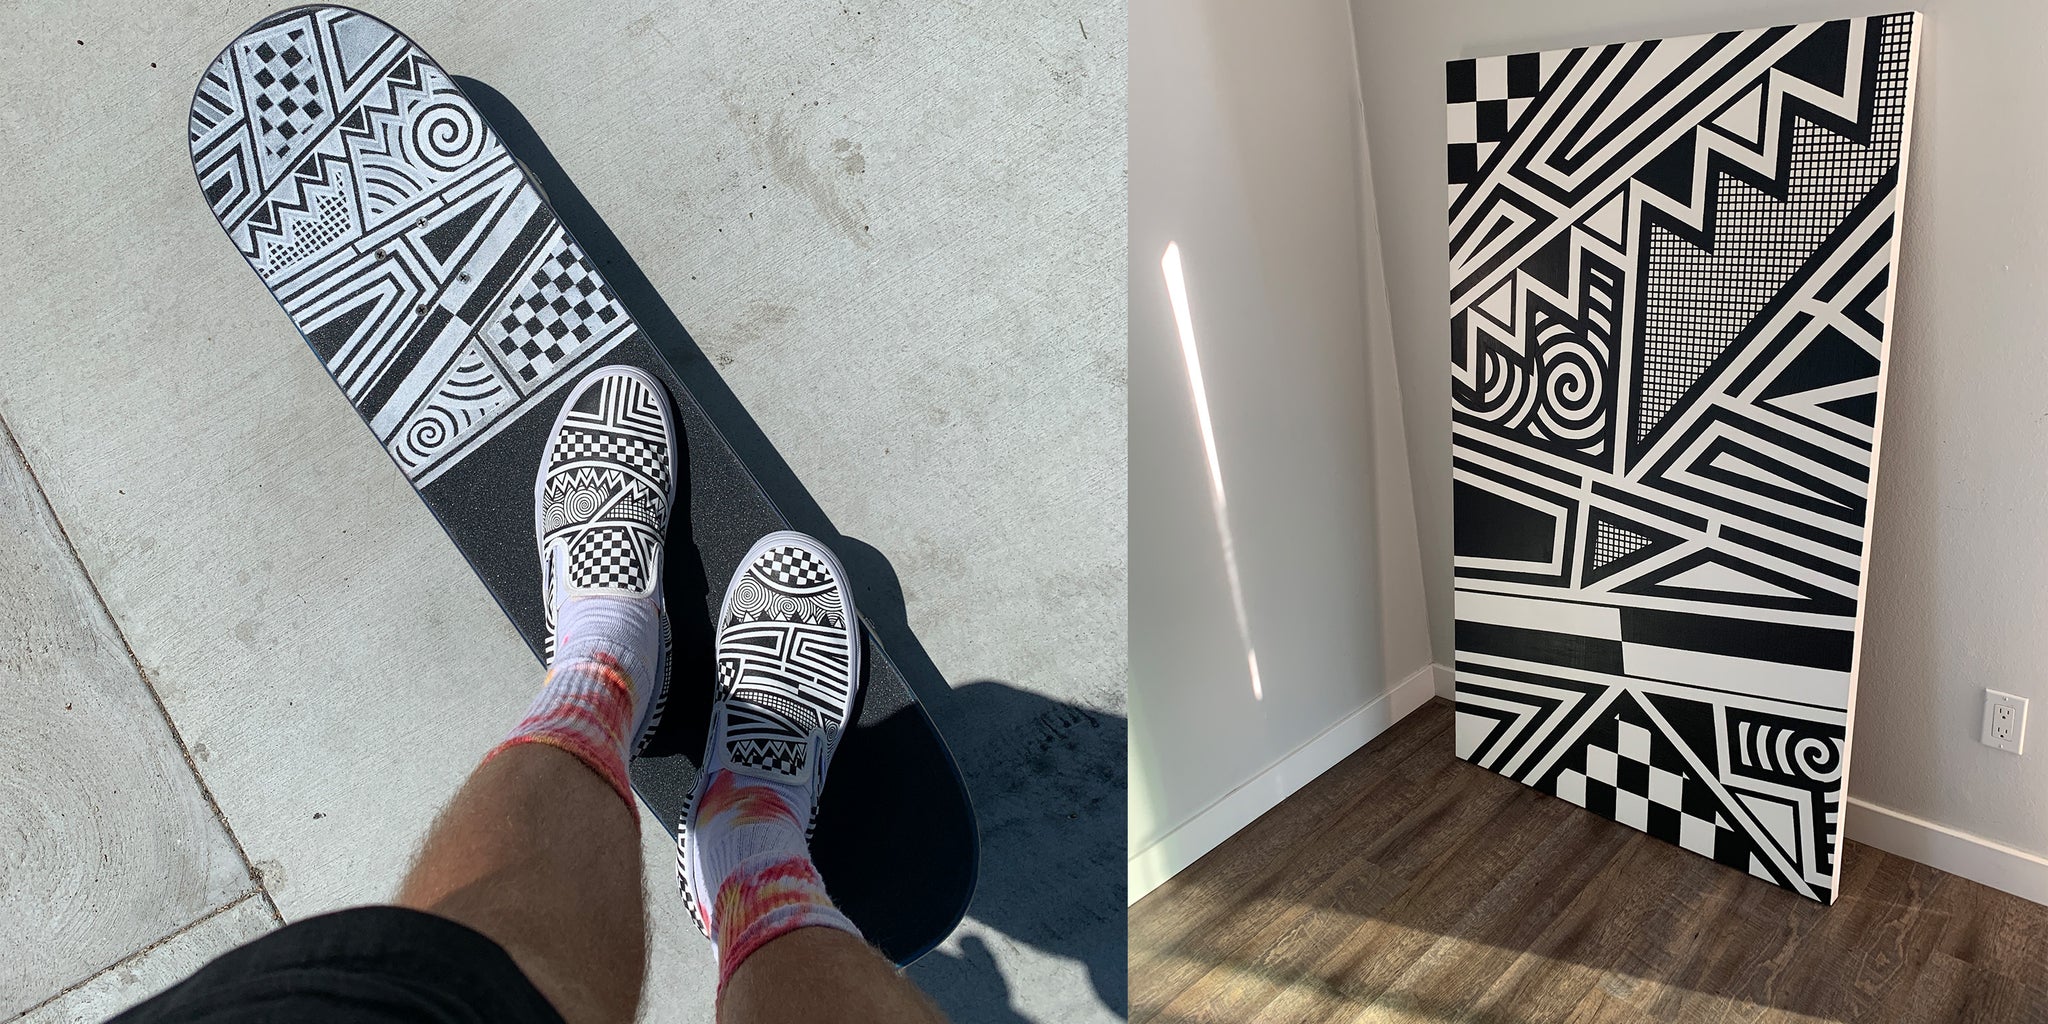 Left Image: Downward viewpoint of someone standing on a skateboard wearing custom van shoes that are painted with geometric lines, the skateboard is also custom with matching geometric lines. On the right: A canvas with bold black geometric lines pained on it, the canvas is leaning against a wall. 